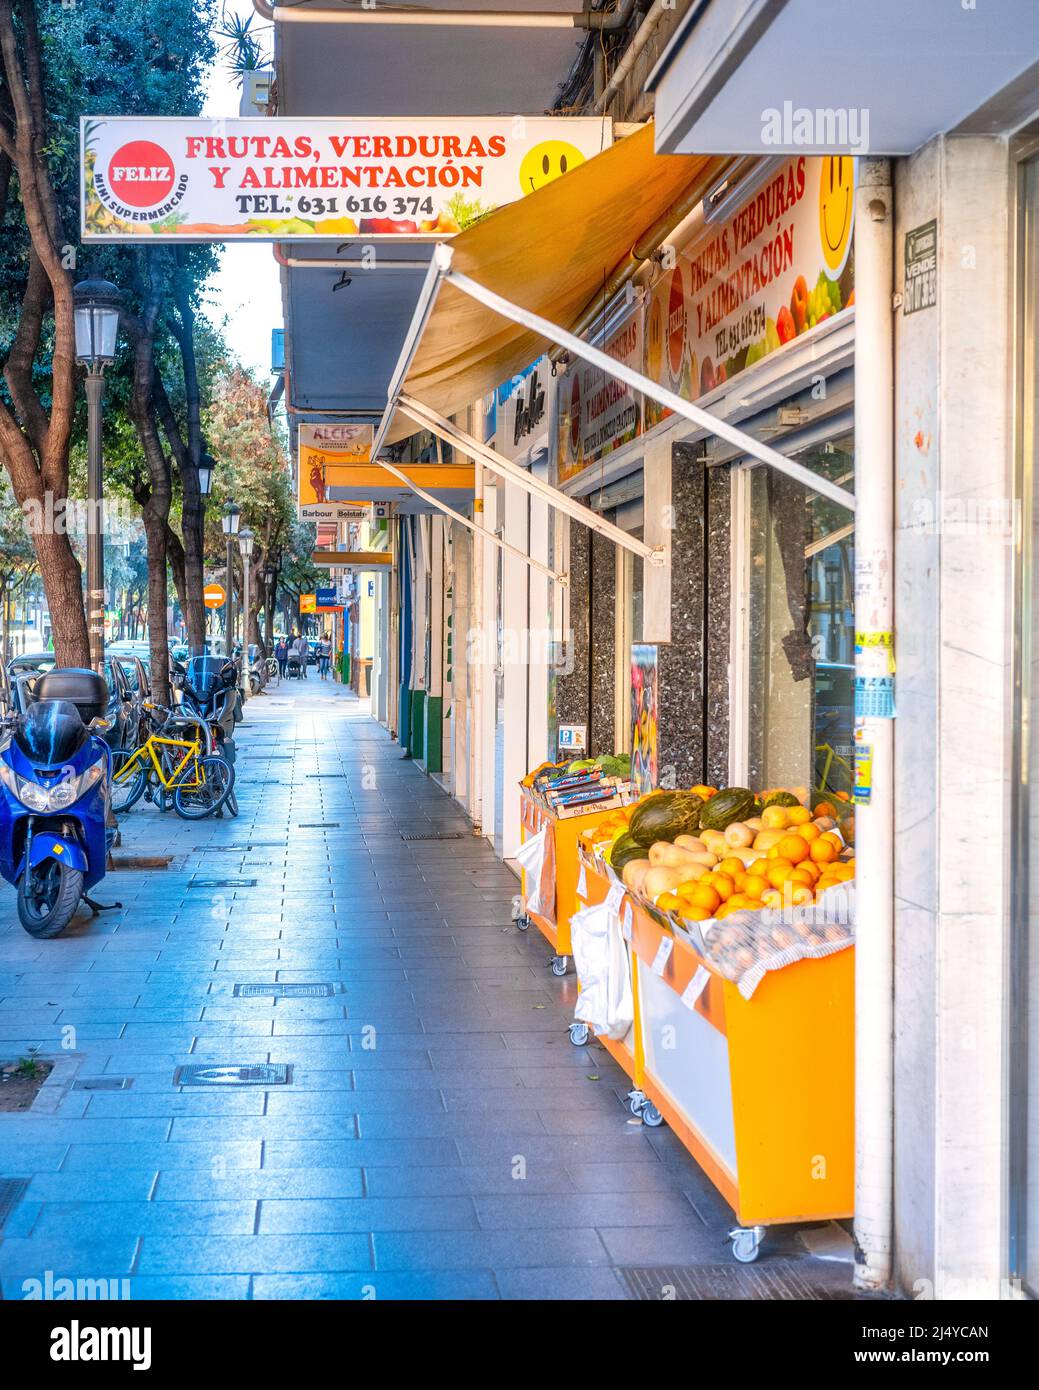 A fresh fruit and vegetables store is seen in a wide sidewalk in the old town area. There are no people in the scene. Valencia city is the capital of Stock Photo